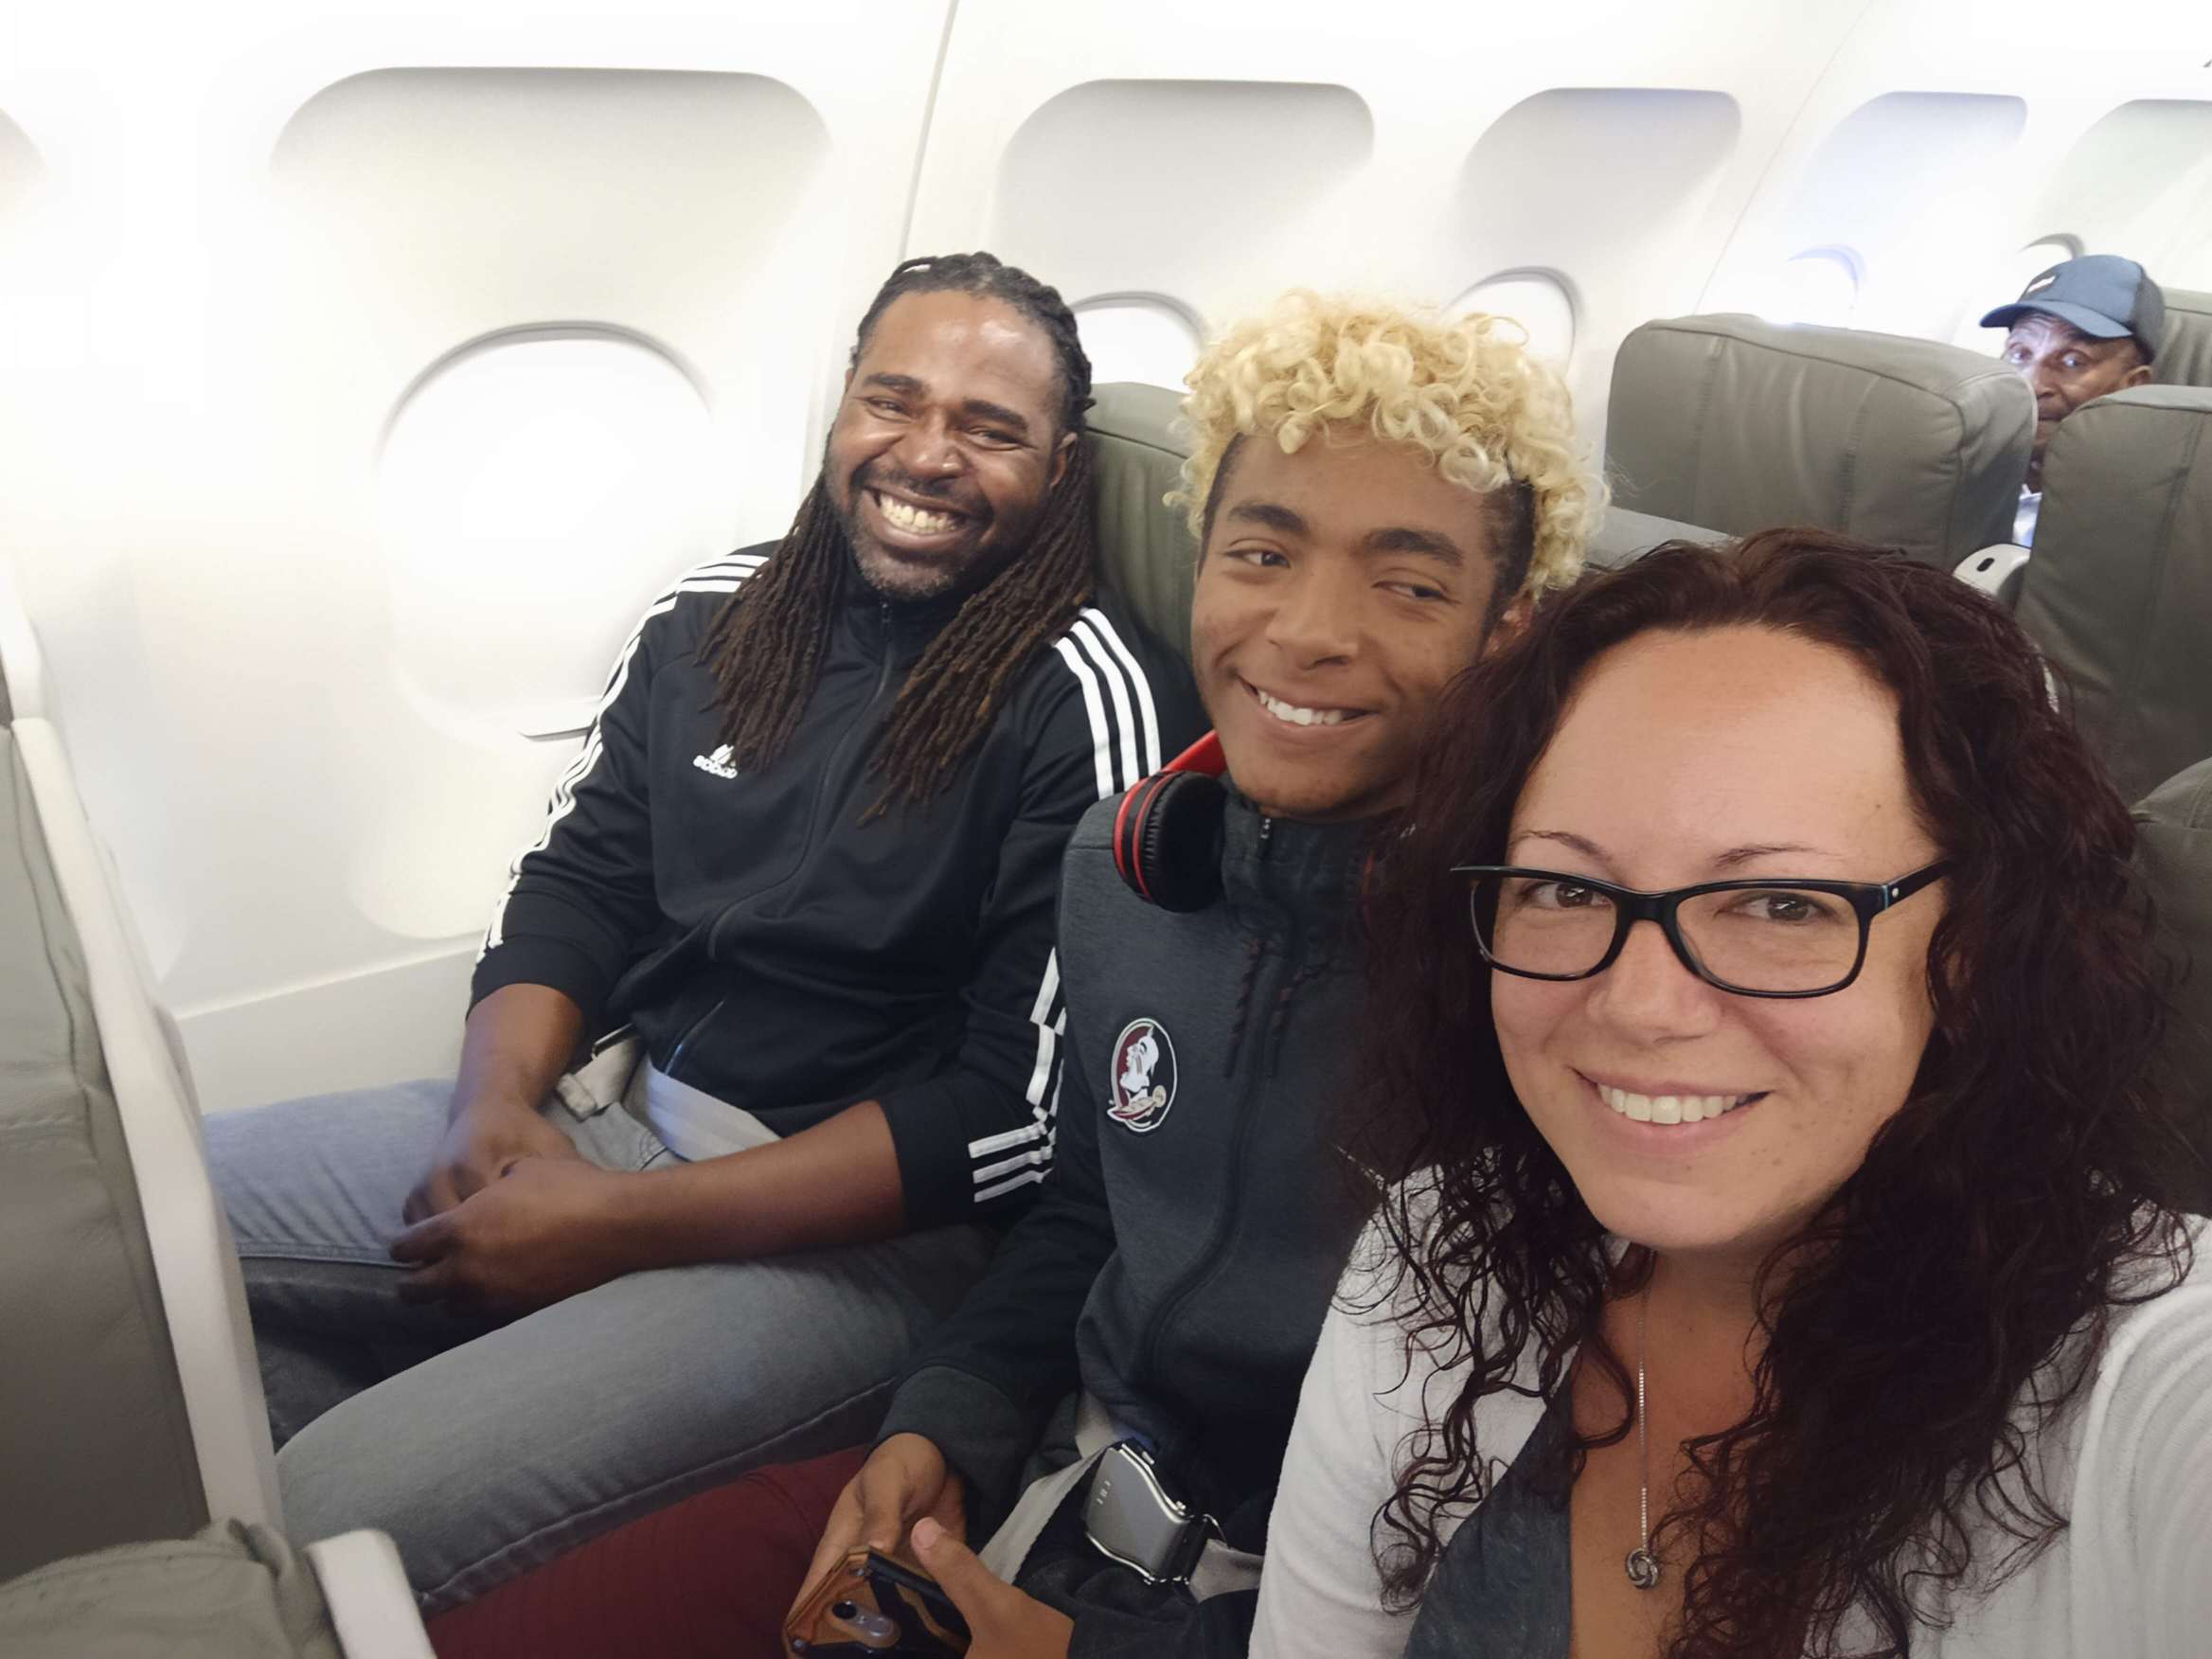 Tien sitting on an airplane with his family